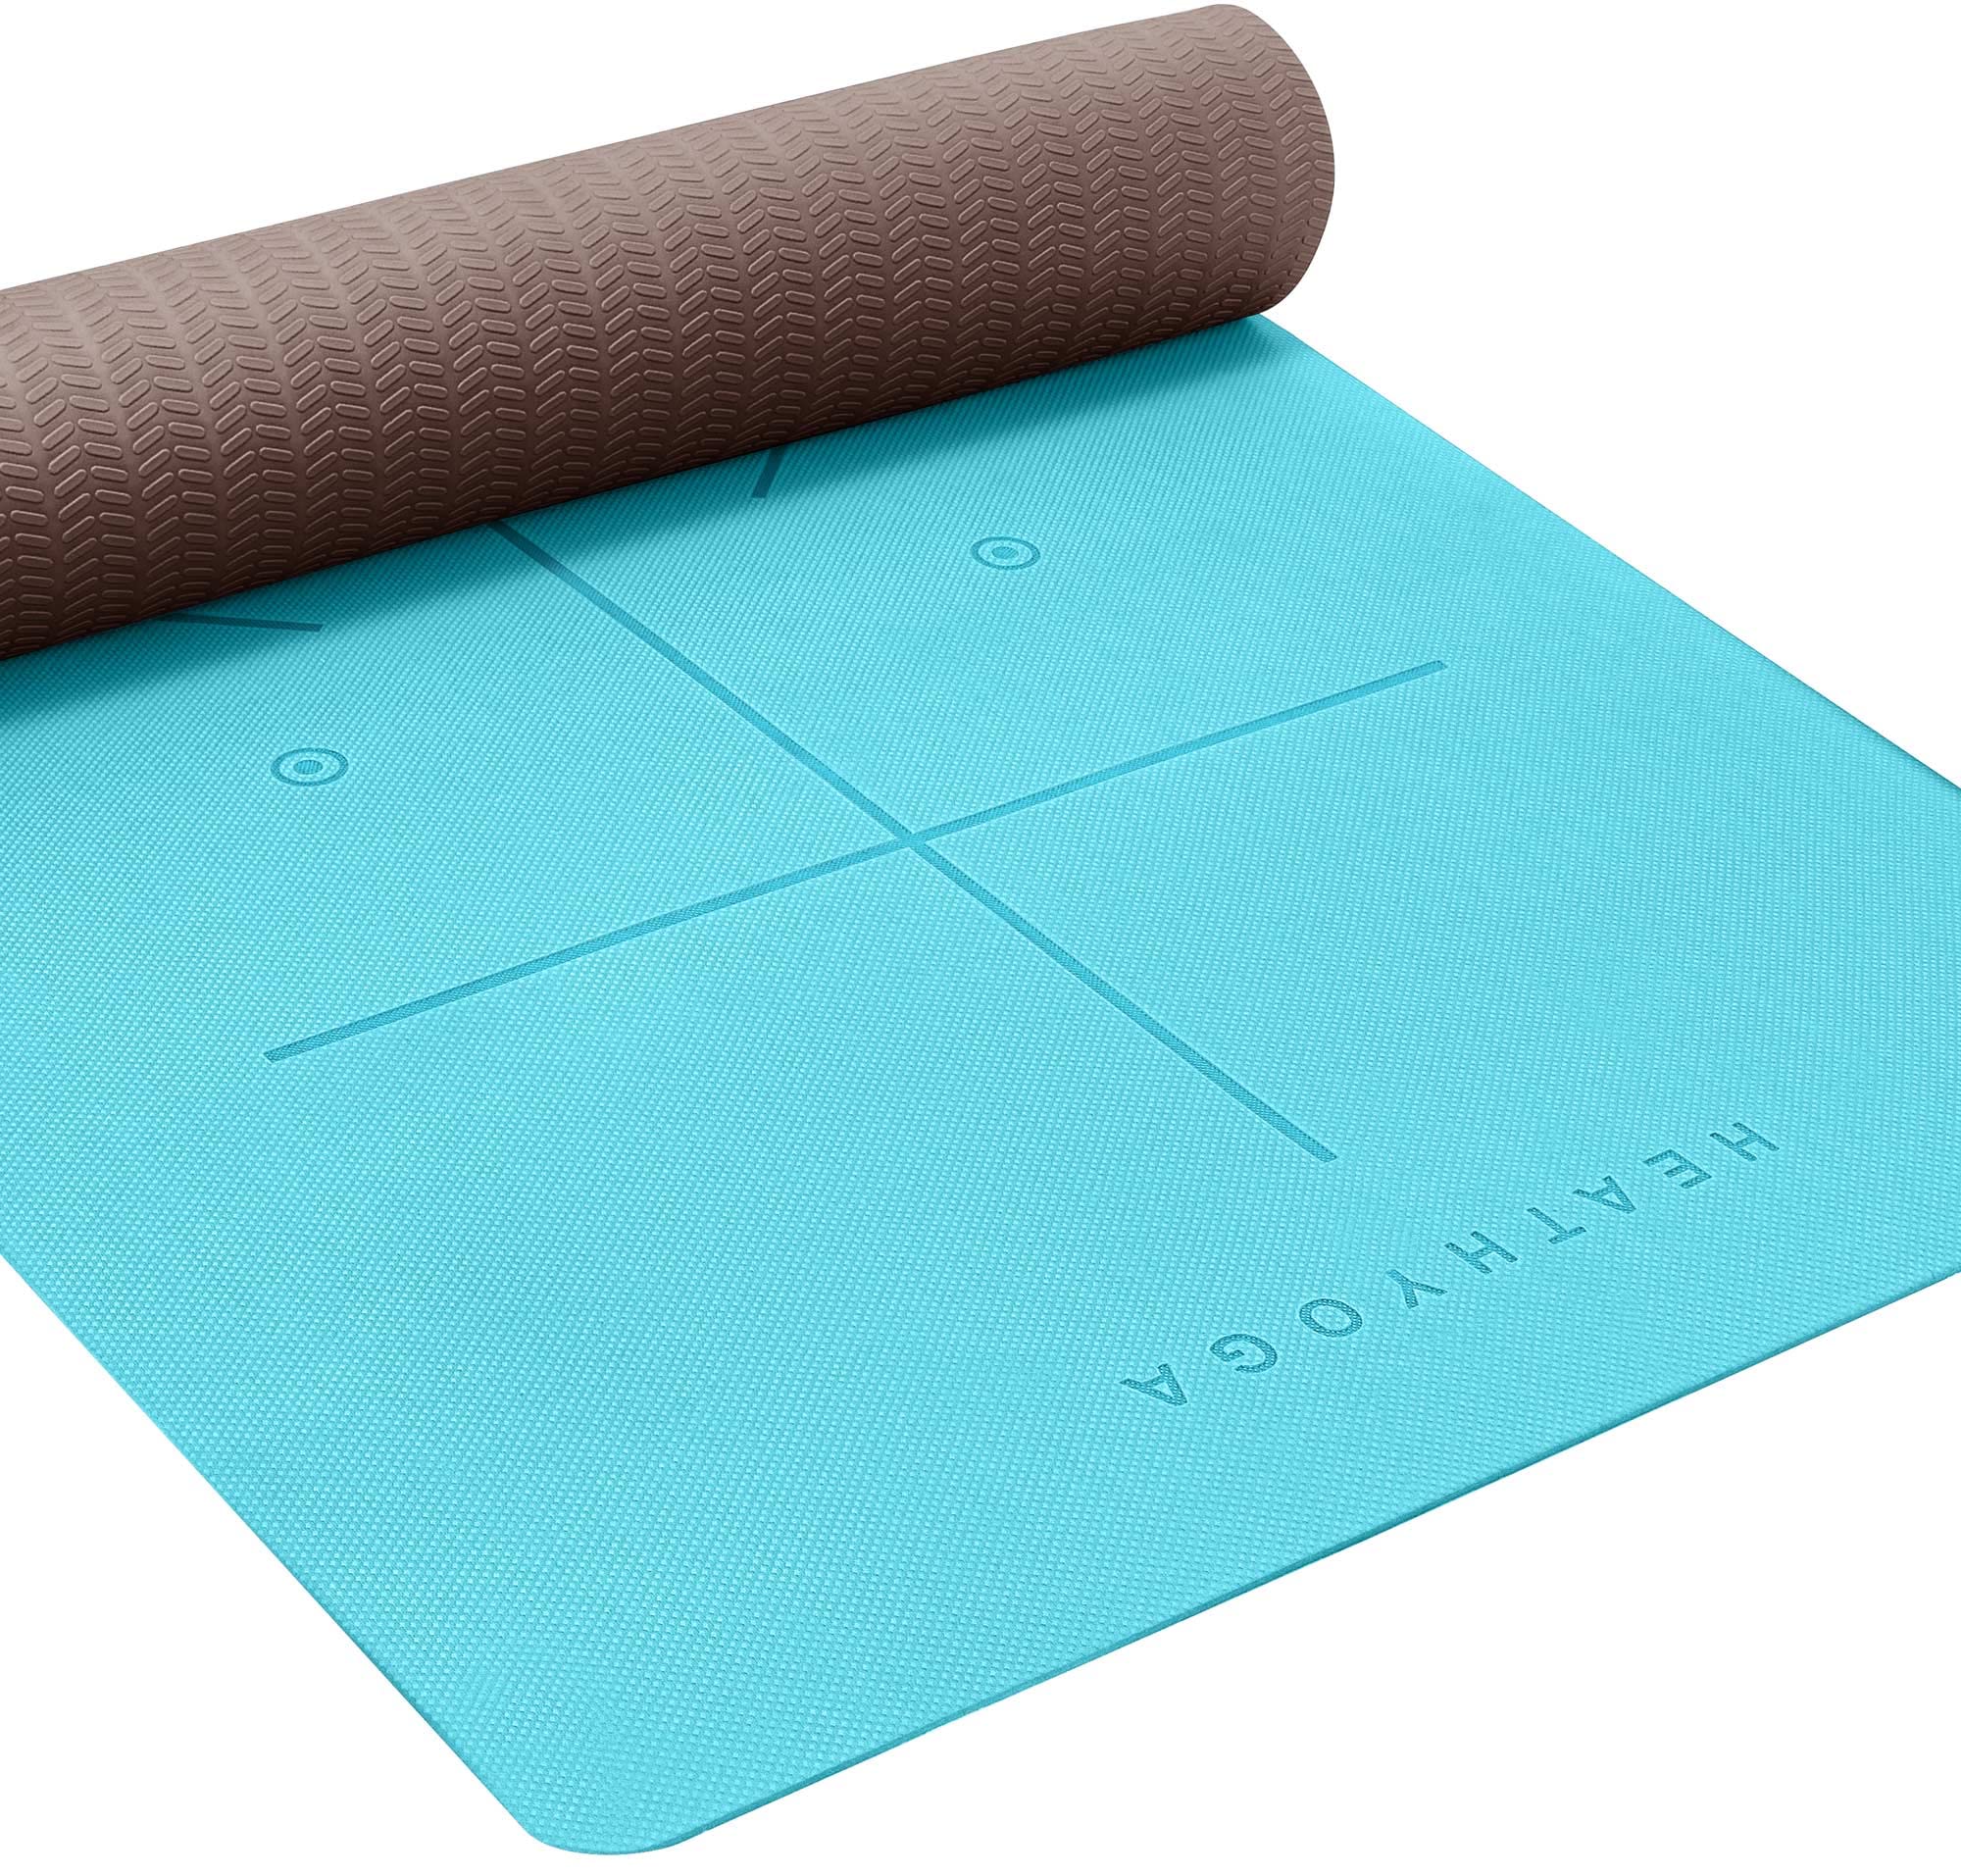 Stay Cool and Comfortable with Heathyoga Yoga Towel